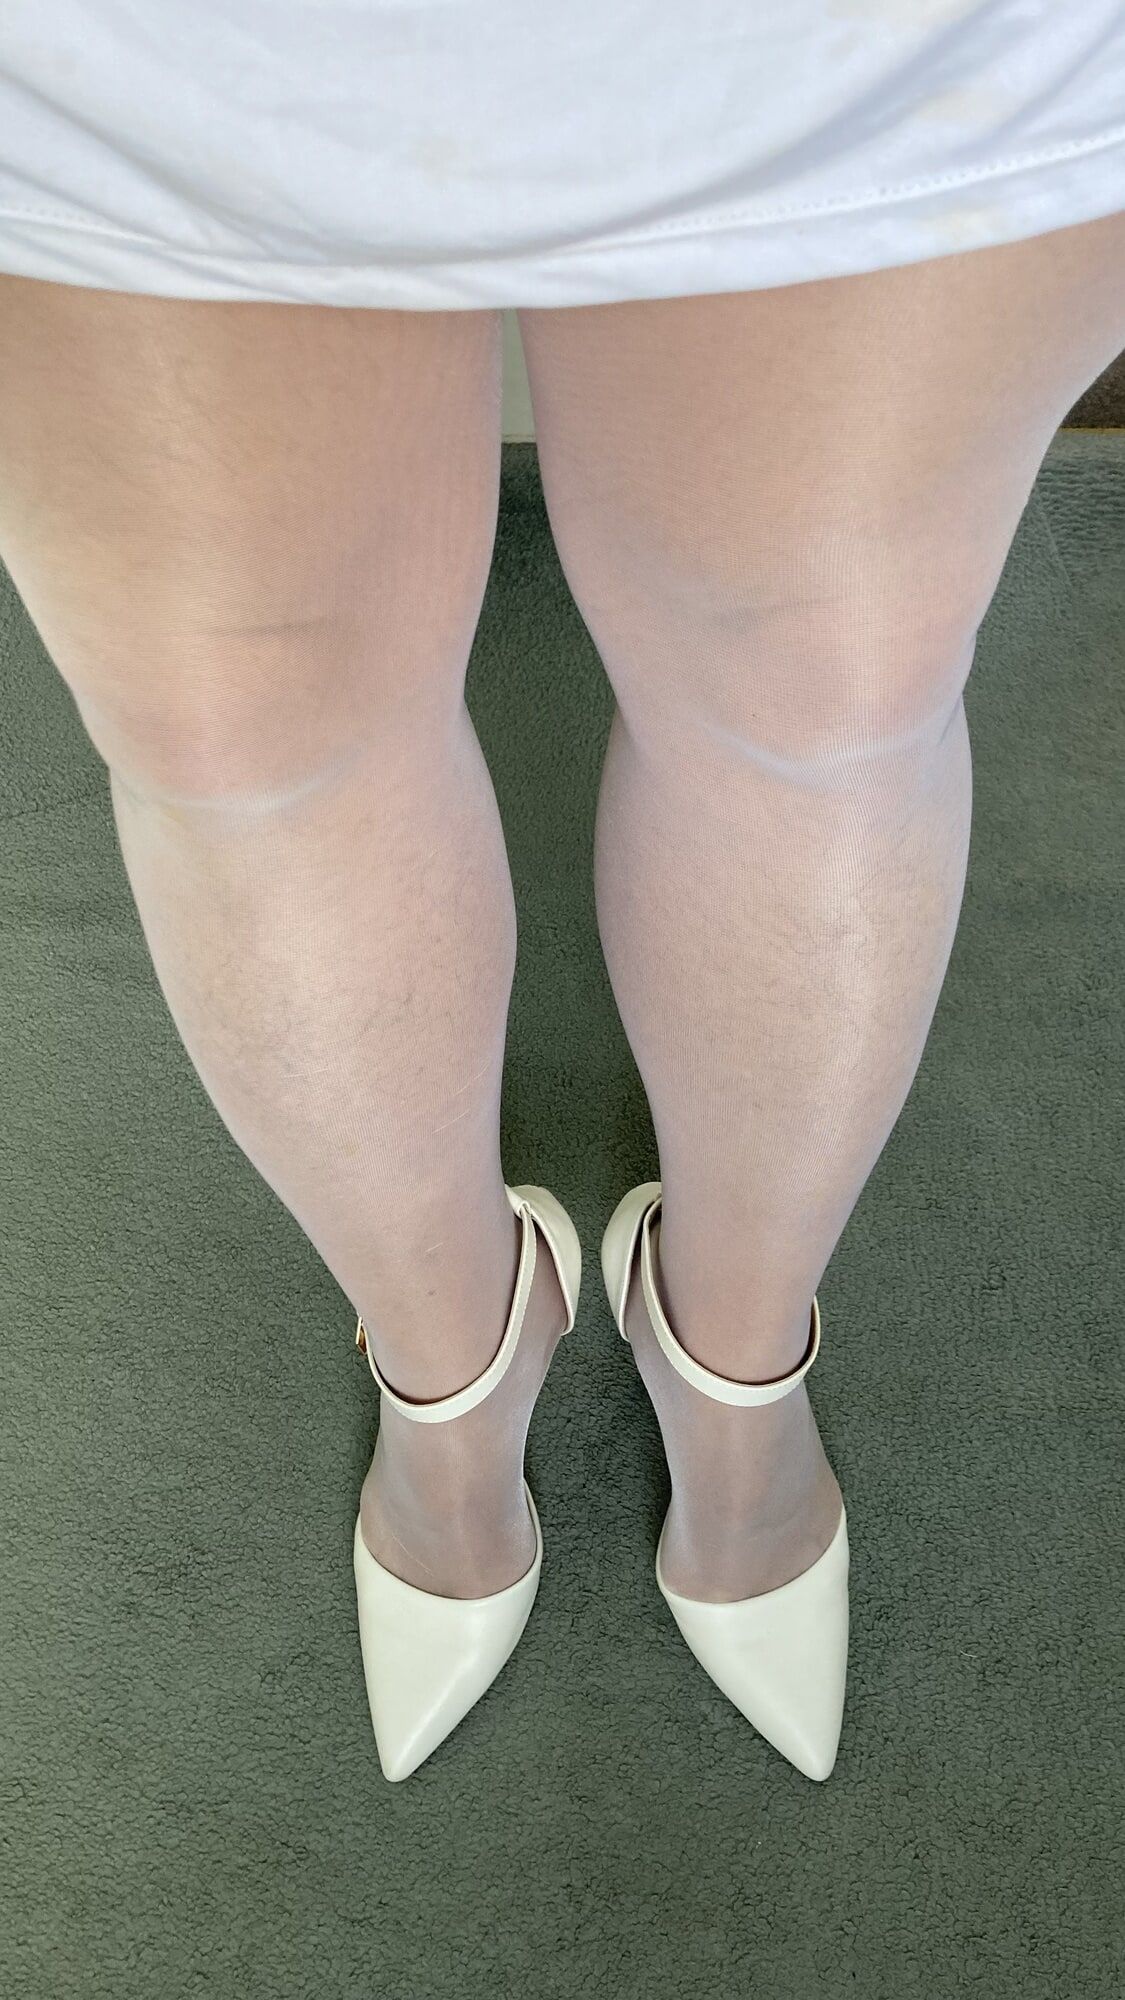 My legs in shiny glossy tights and sexy high heels #19